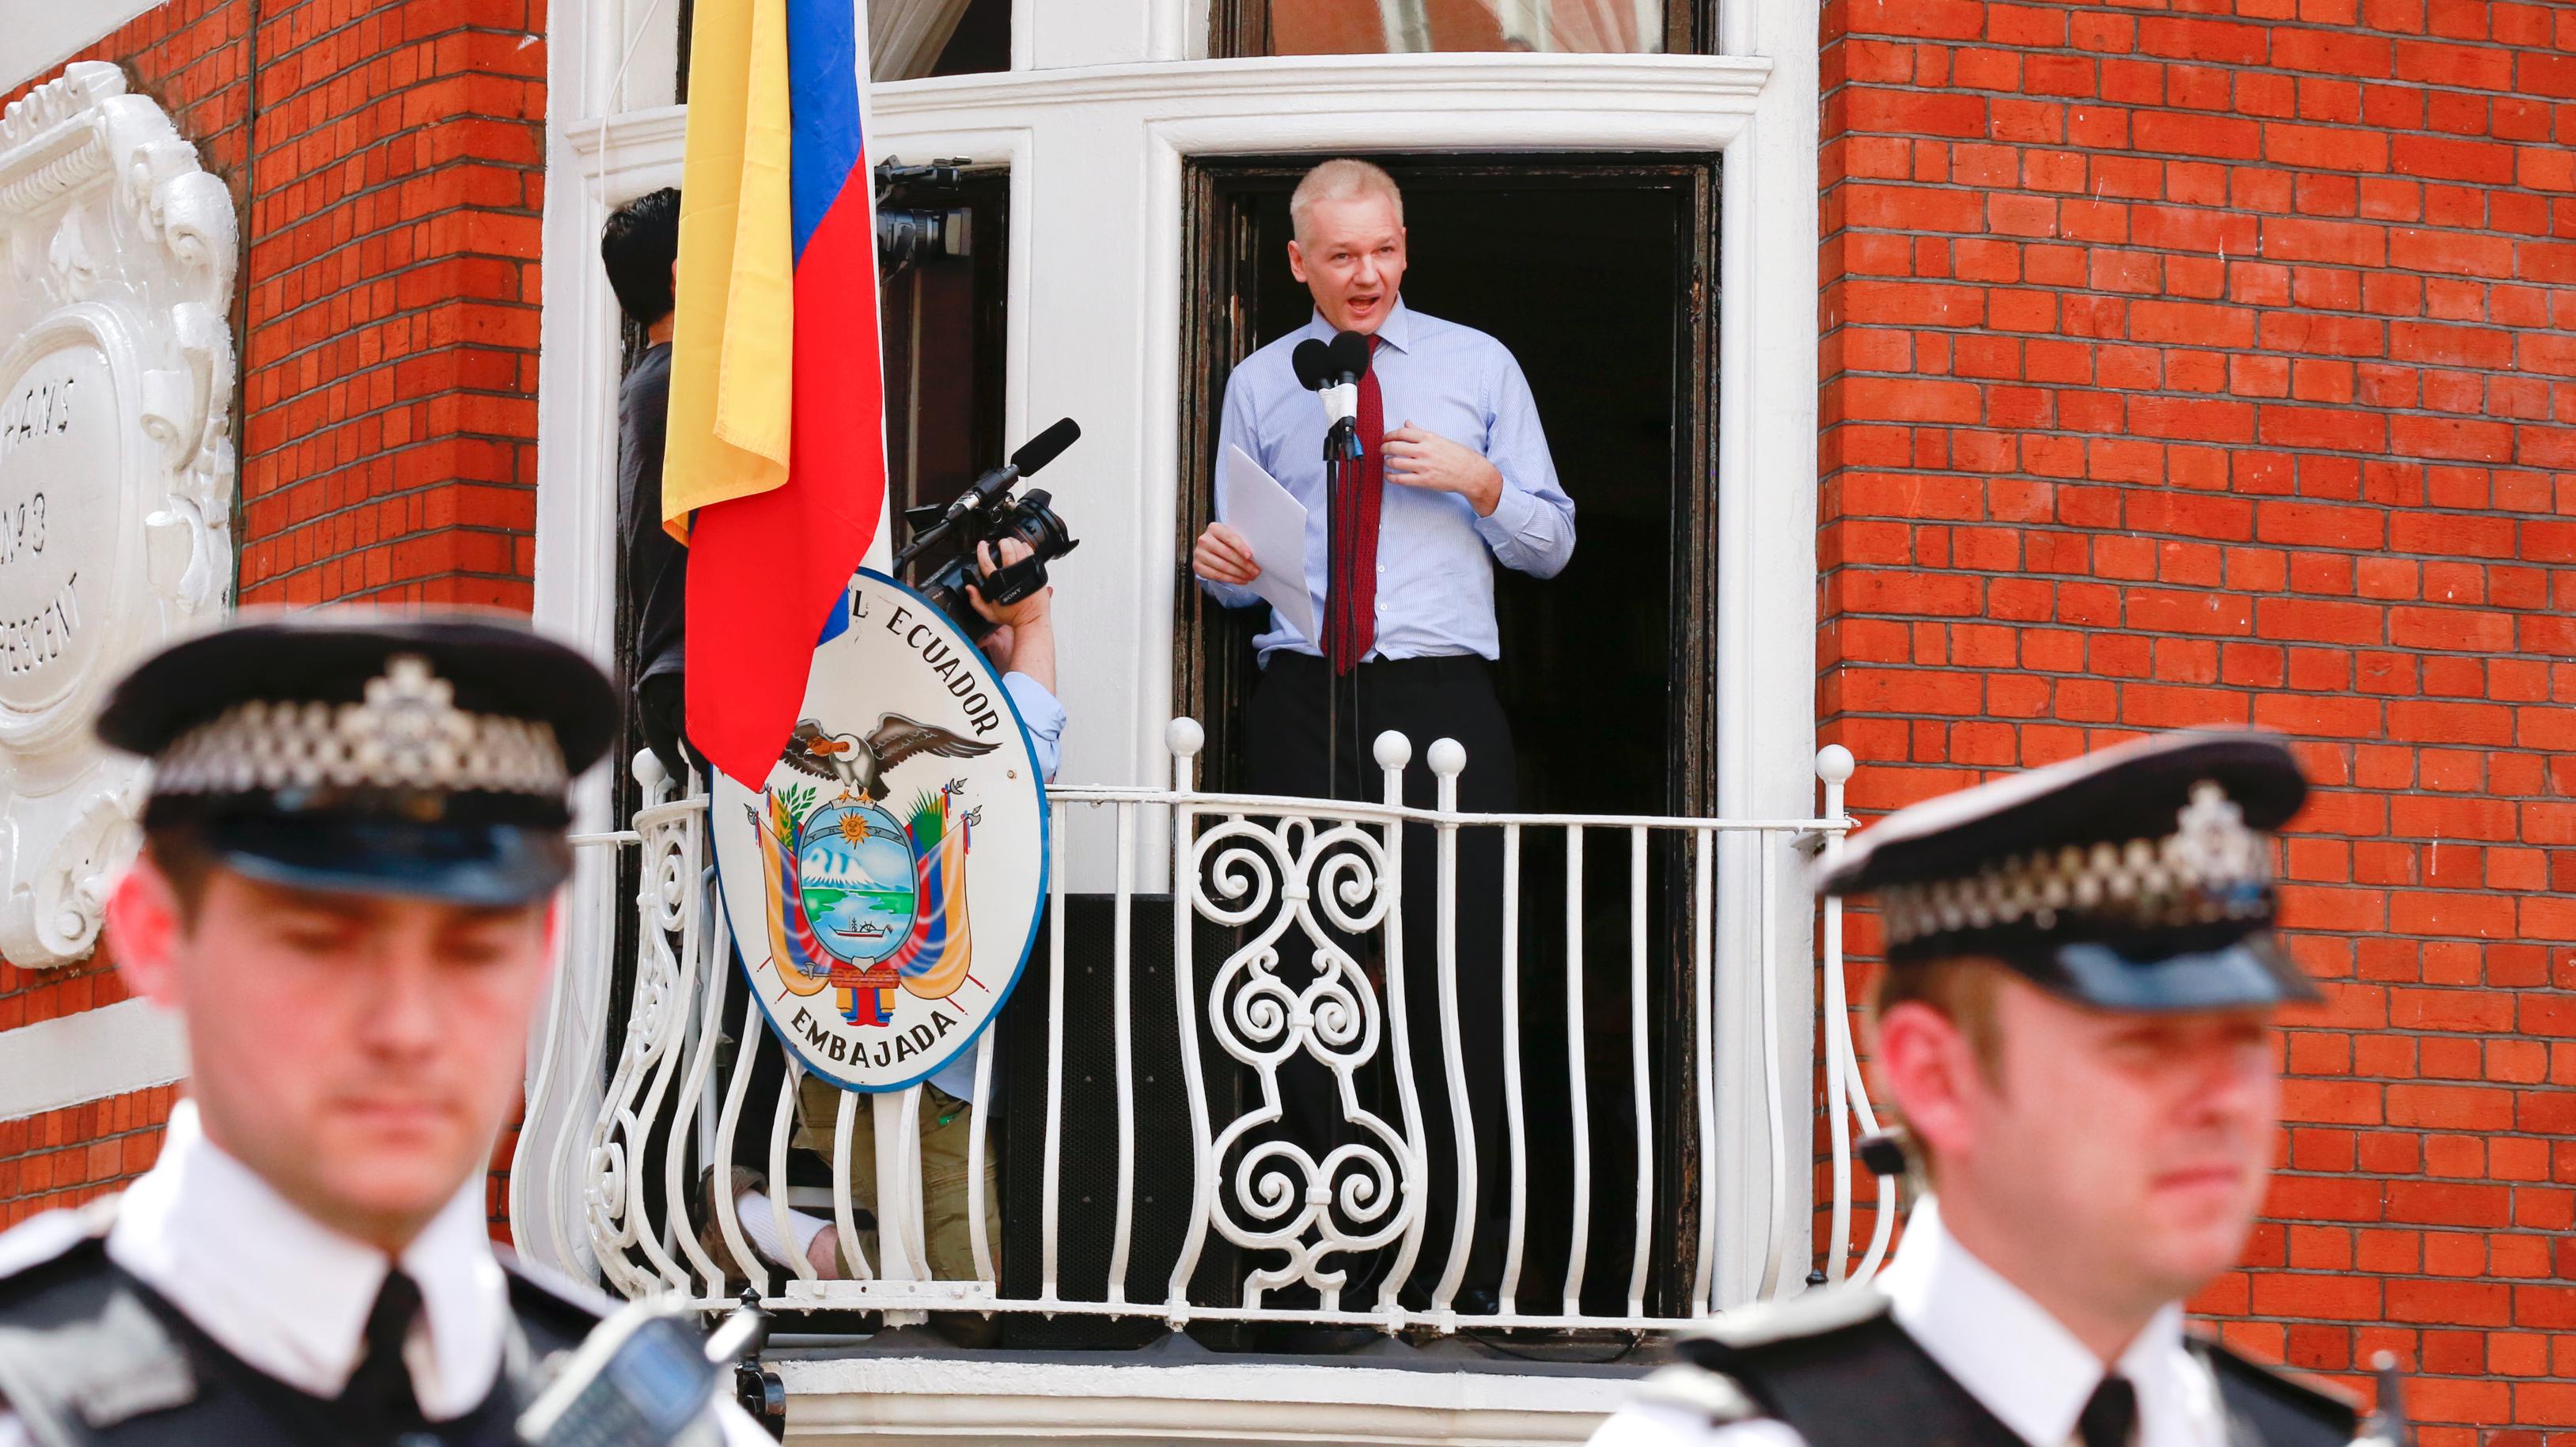 Assange has been trapped inside Ecuador's Embassy in London since he sought asylum there in 2012 to avoid extradition to Sweden.